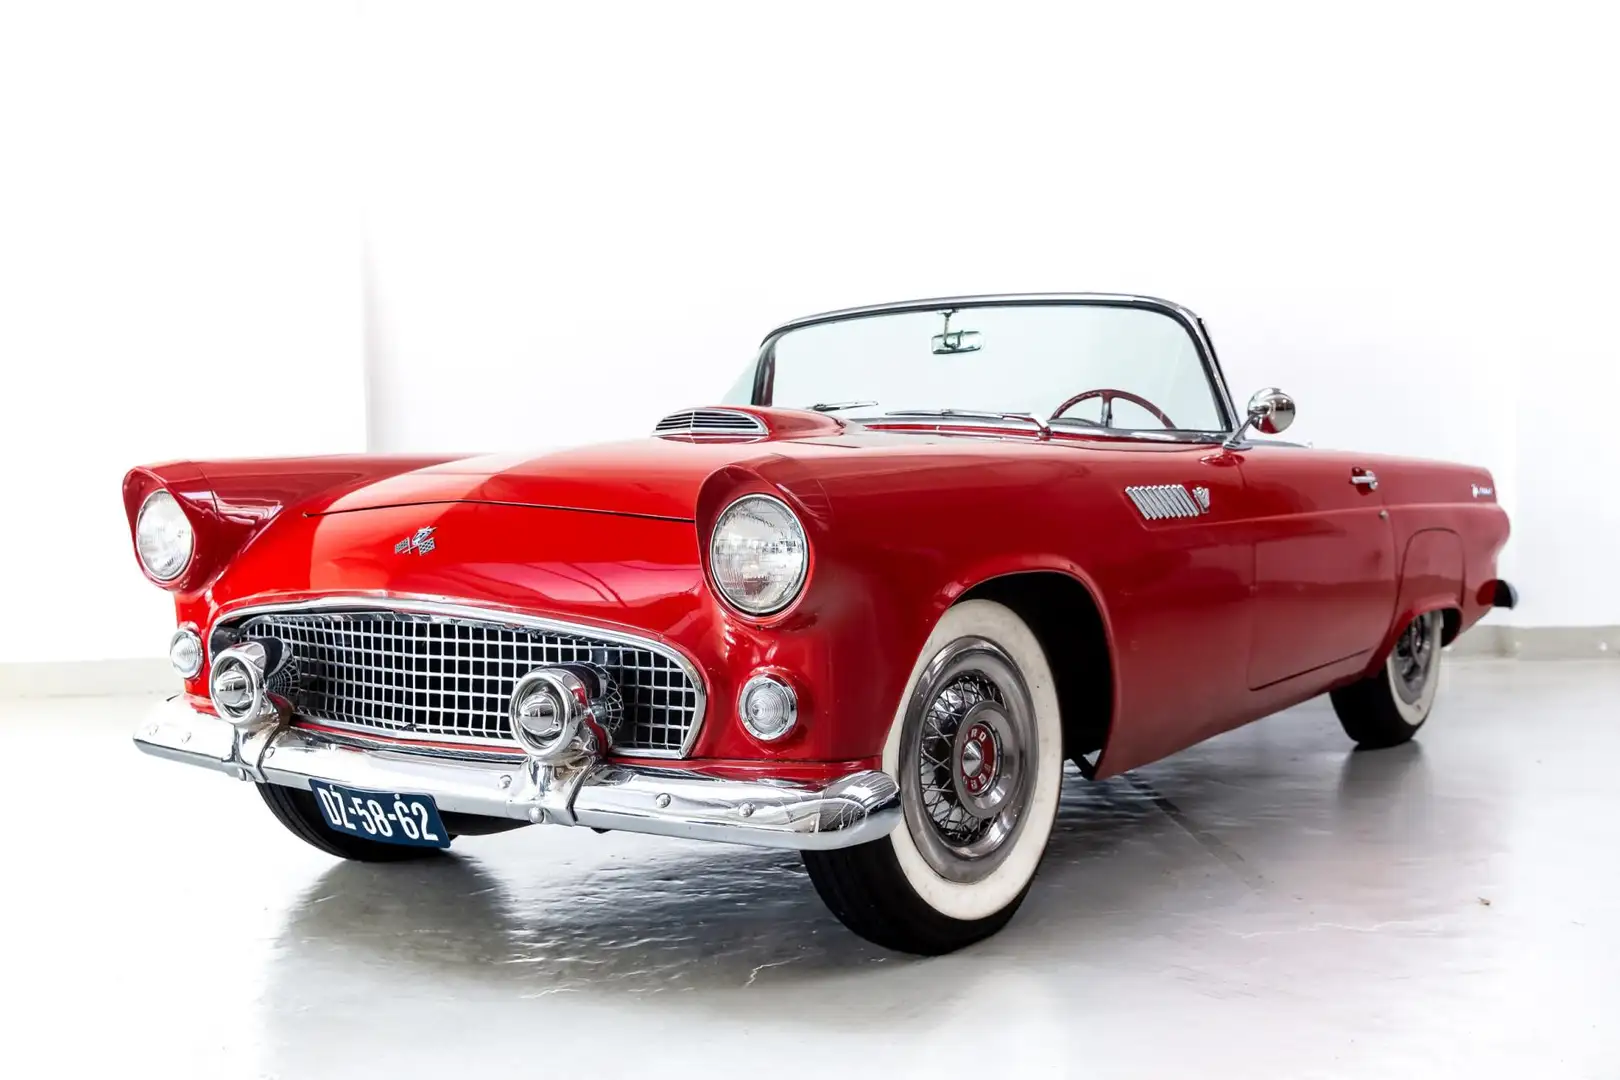 Ford Thunderbird - Y Block V8 - Collectors Car Rouge - 1